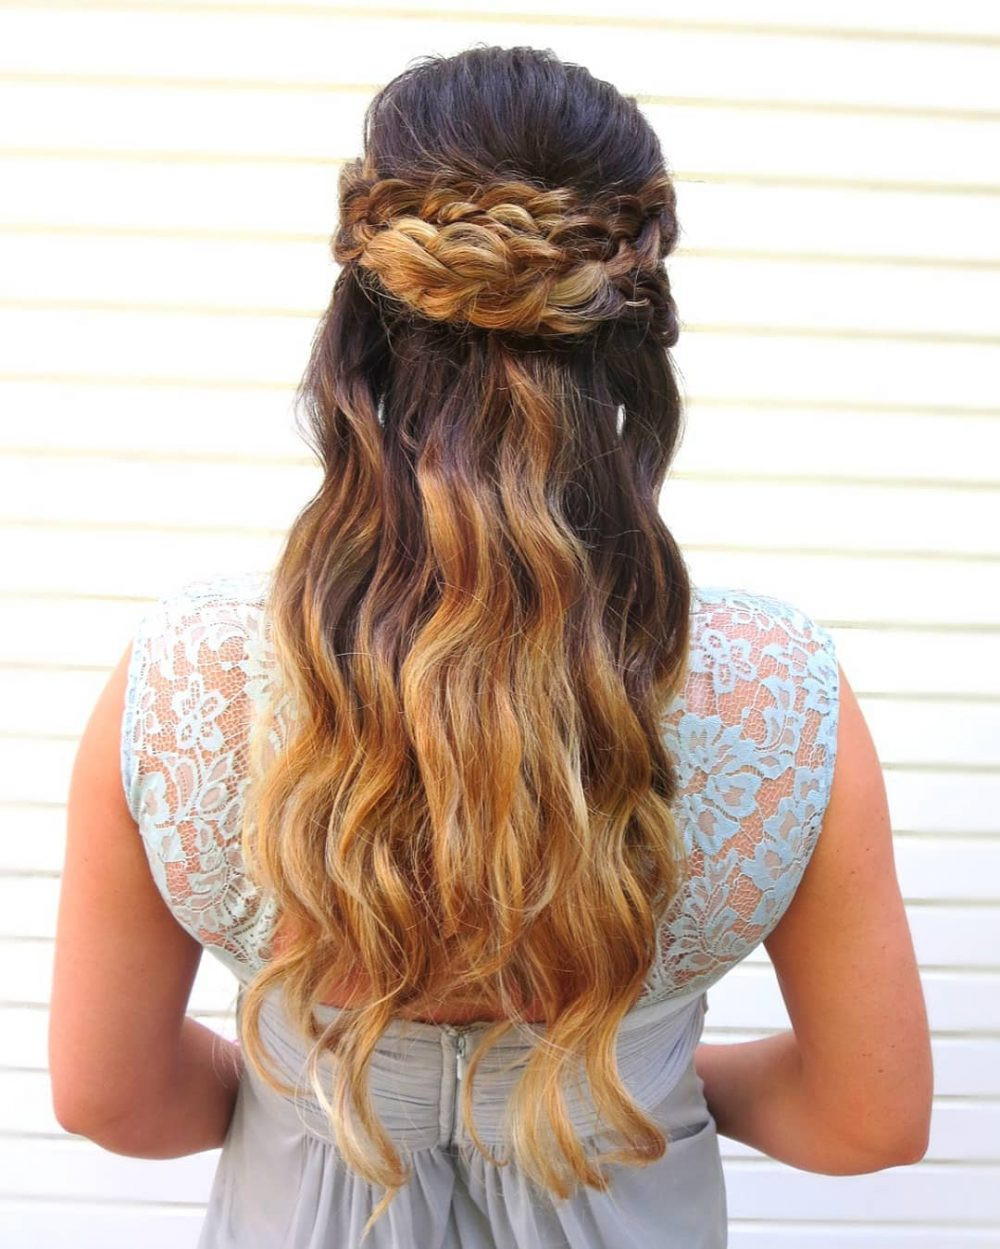 Prom Hairstyle Half Updos
 27 Prettiest Half Up Half Down Prom Hairstyles for 2020